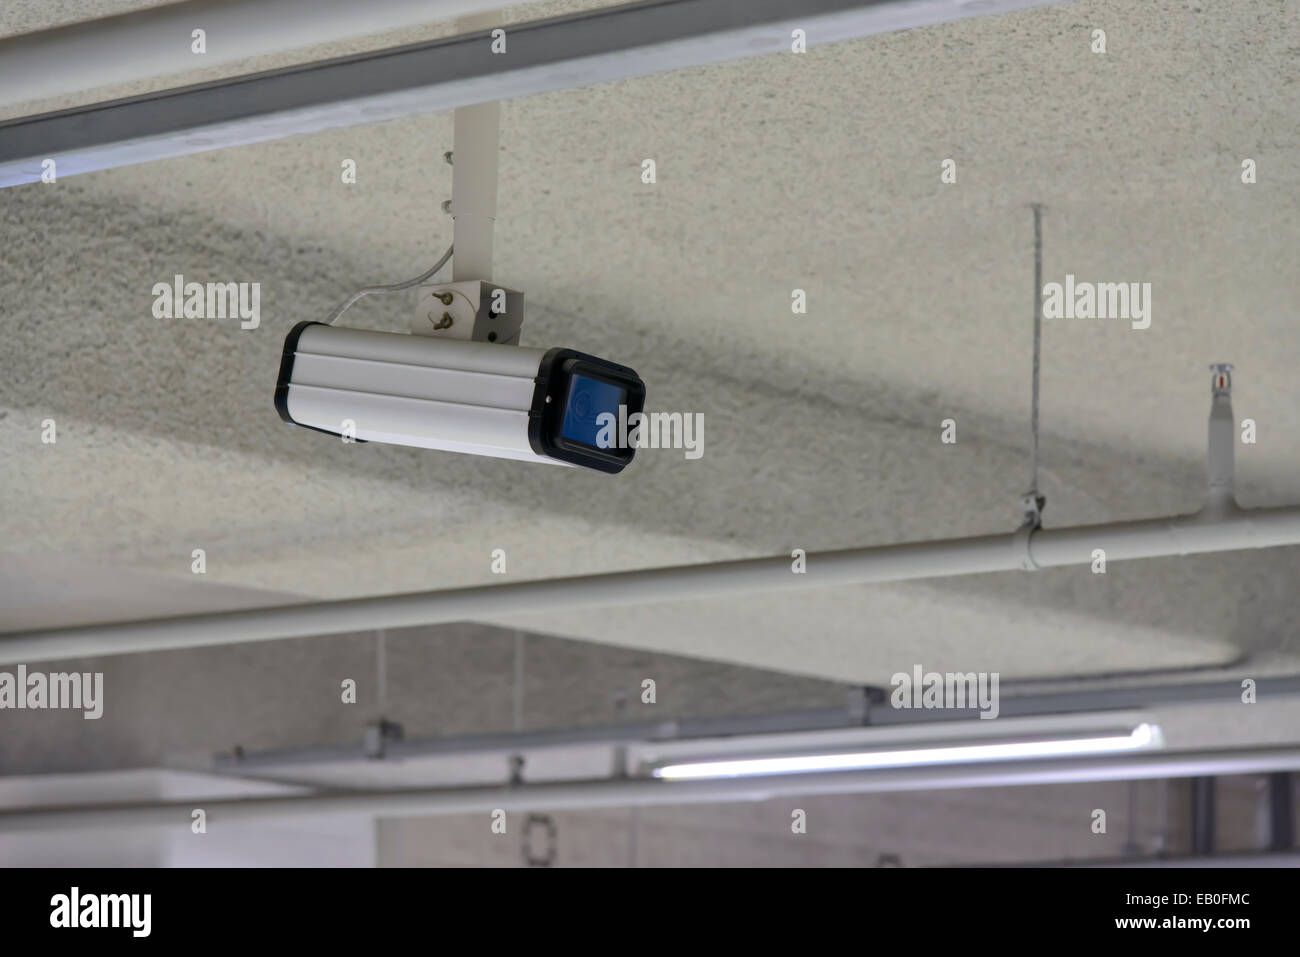 cctv camera on the ceiling in parking lot Stock Photo